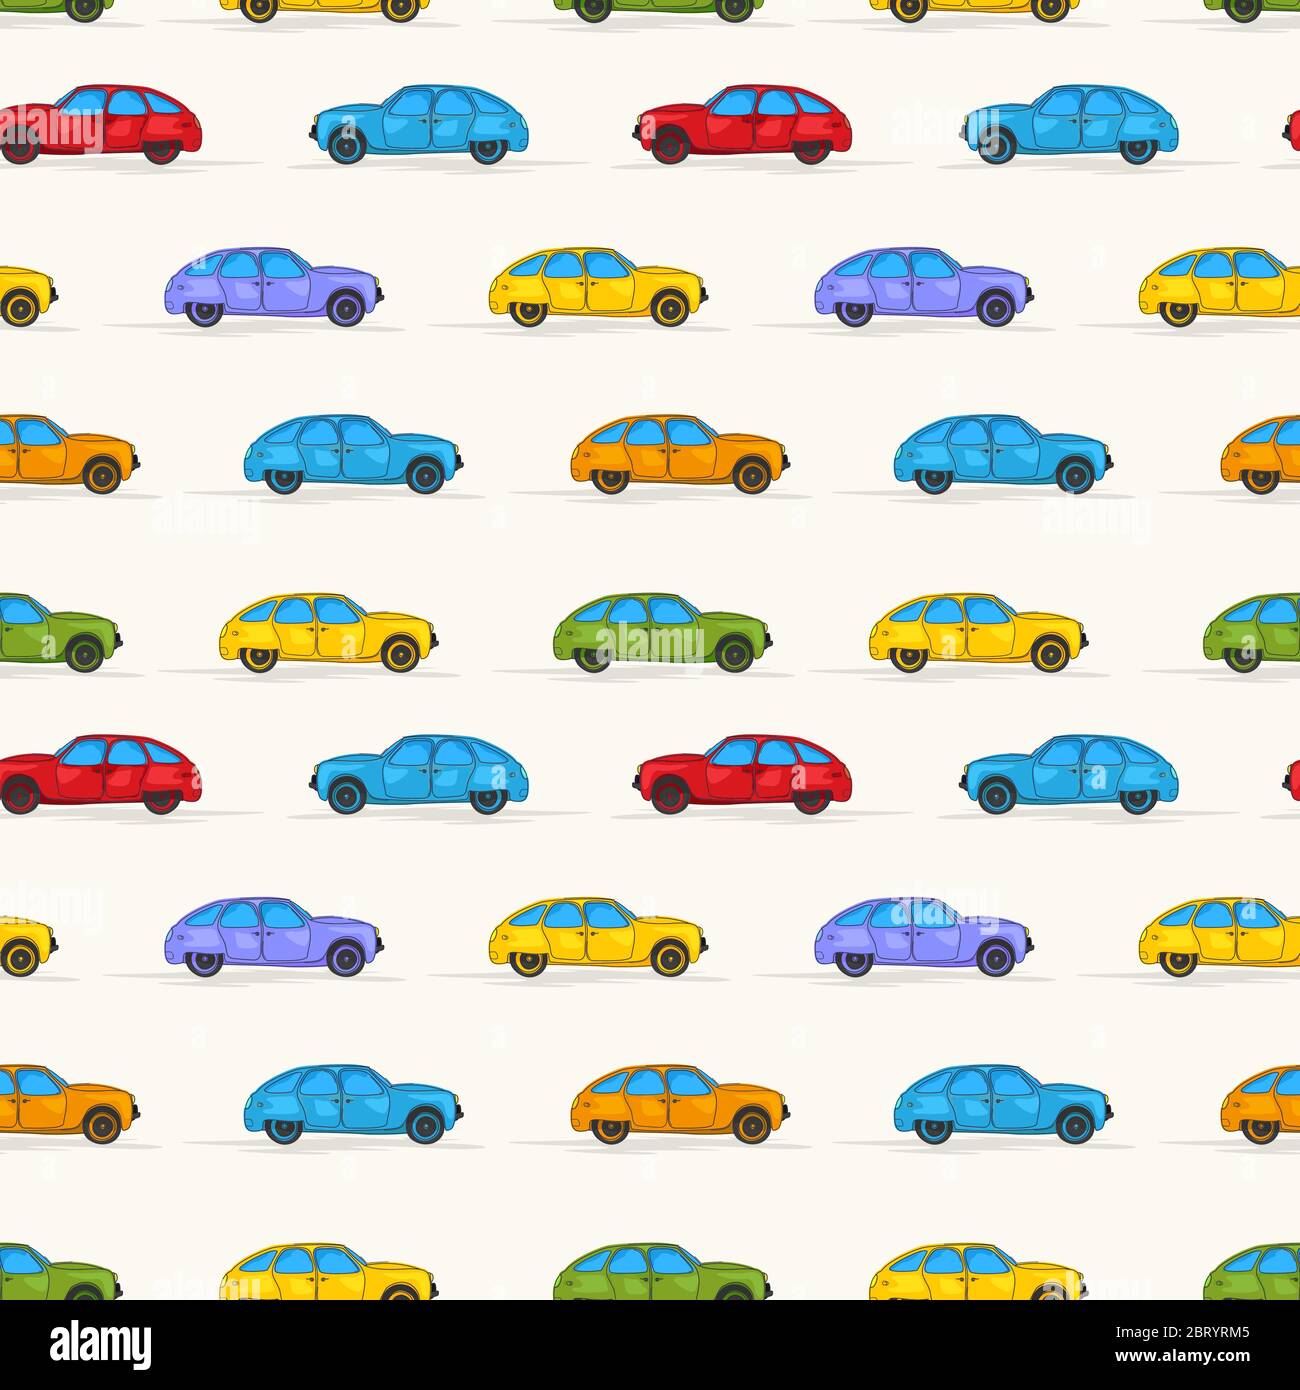 Cartoon cars repeating pattern for decor Stock Vector